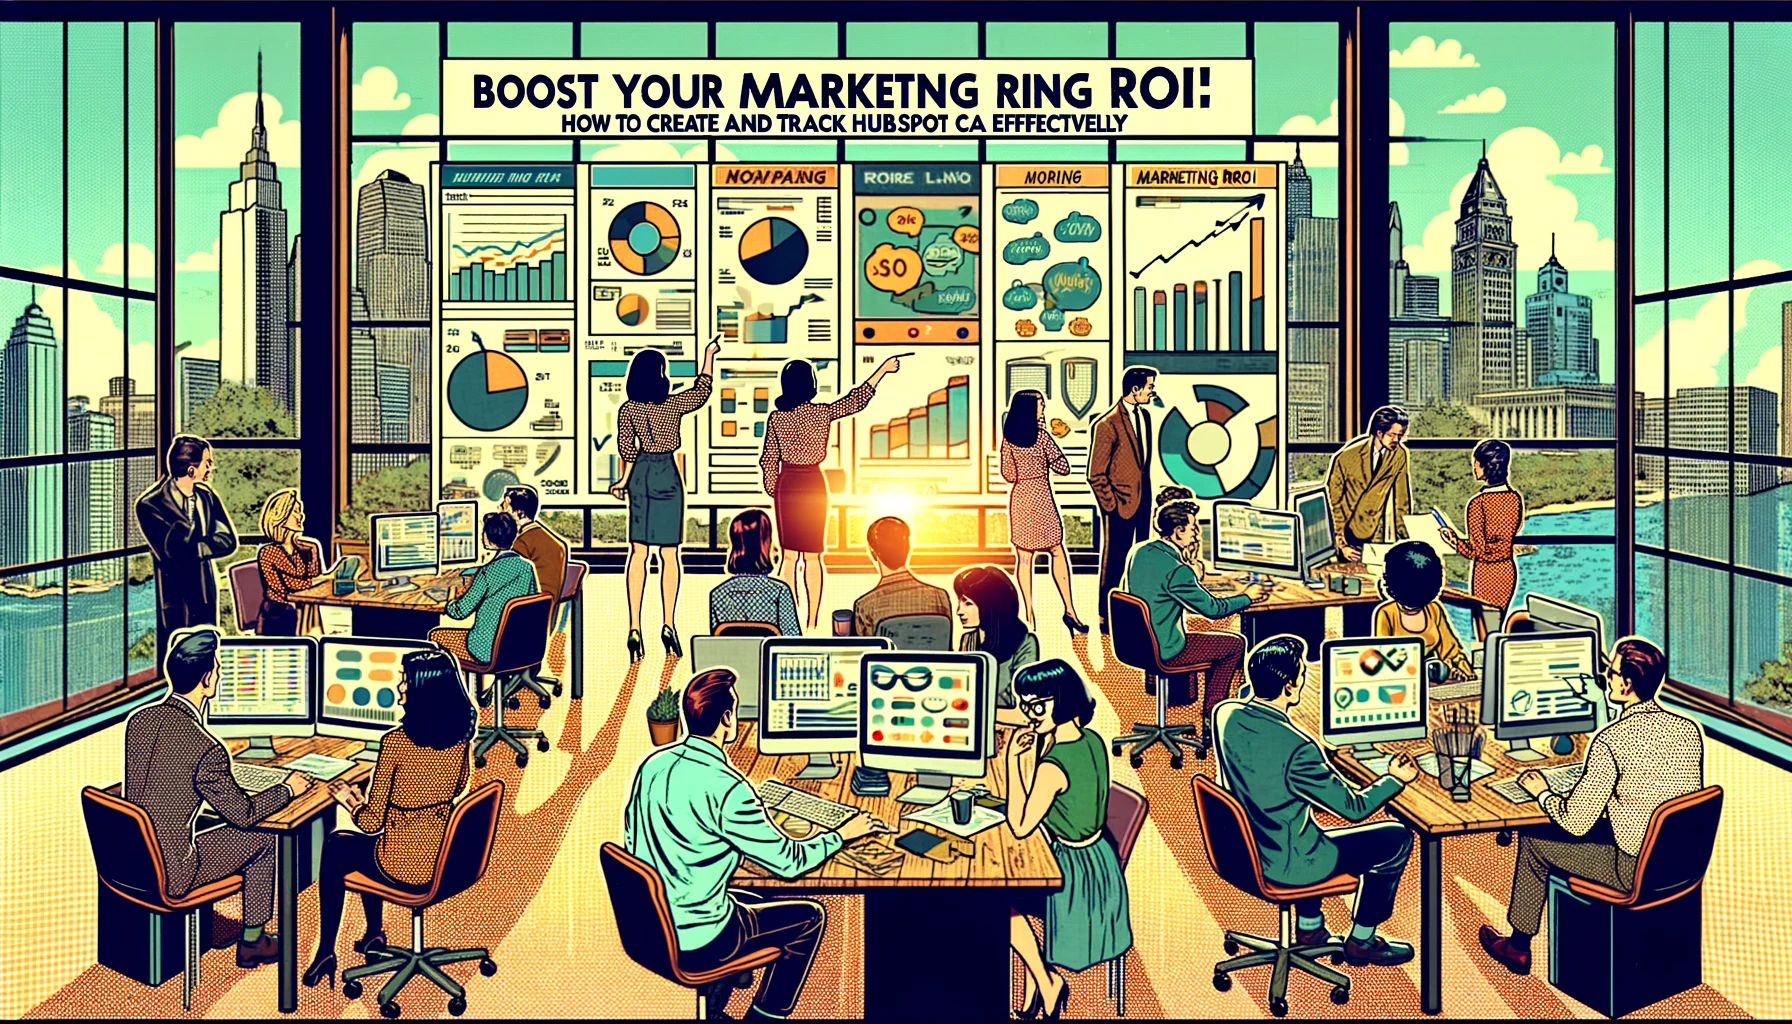 Boost Your Marketing ROI: How to Create and Track HubSpot CTAs Effectively